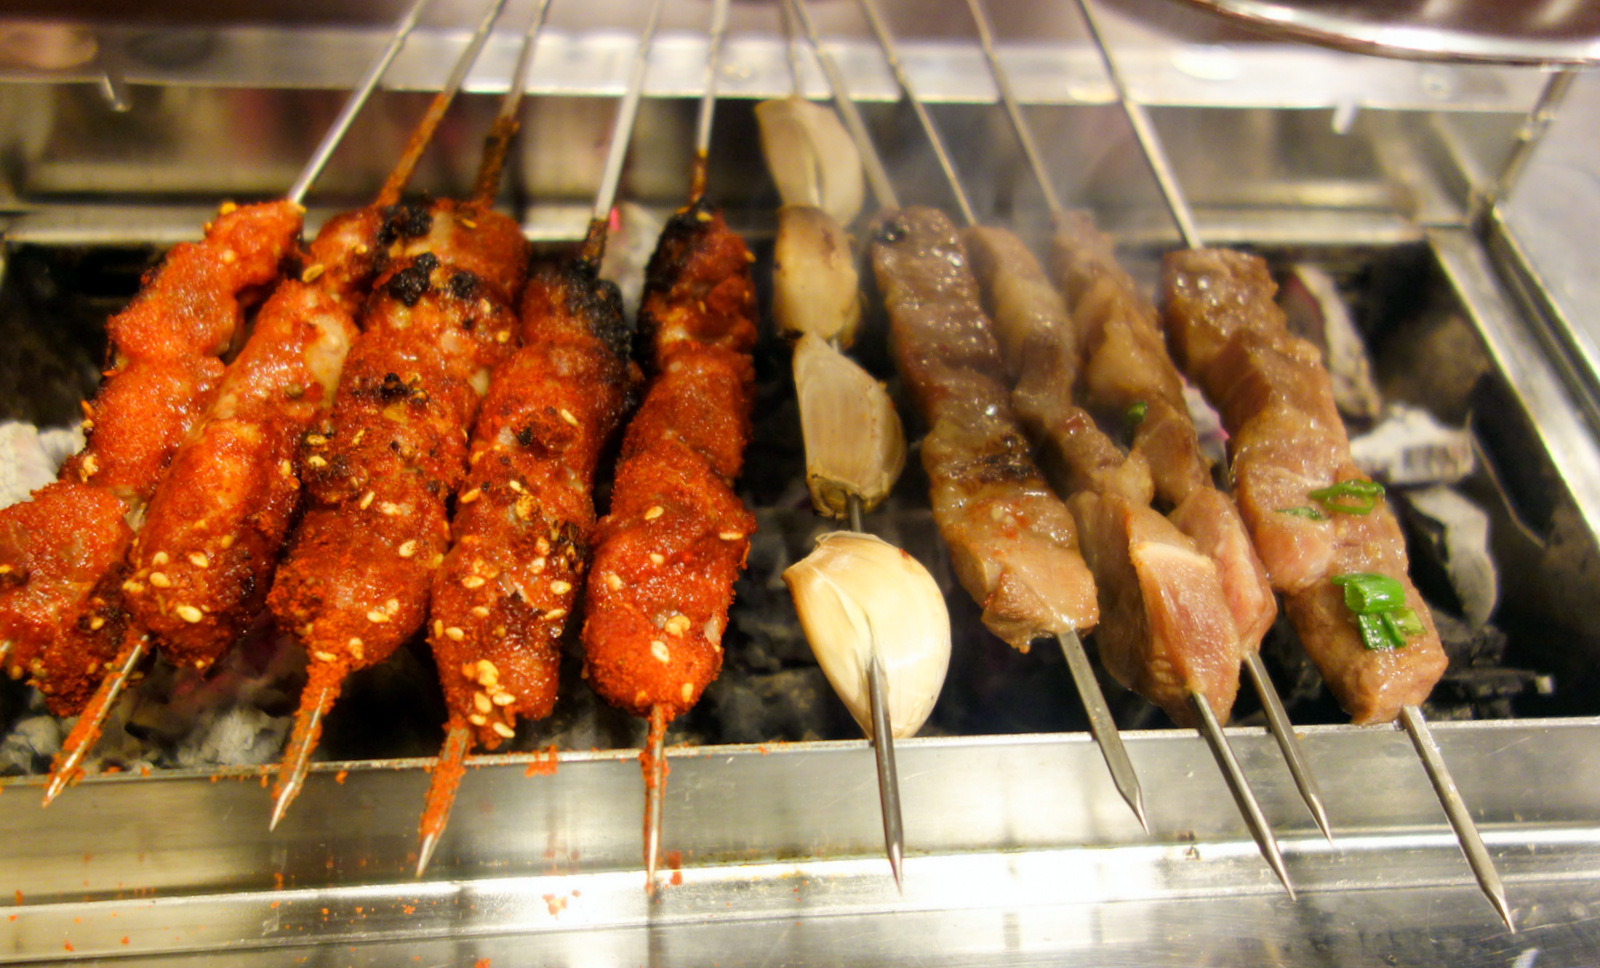 4. Barbecued meat